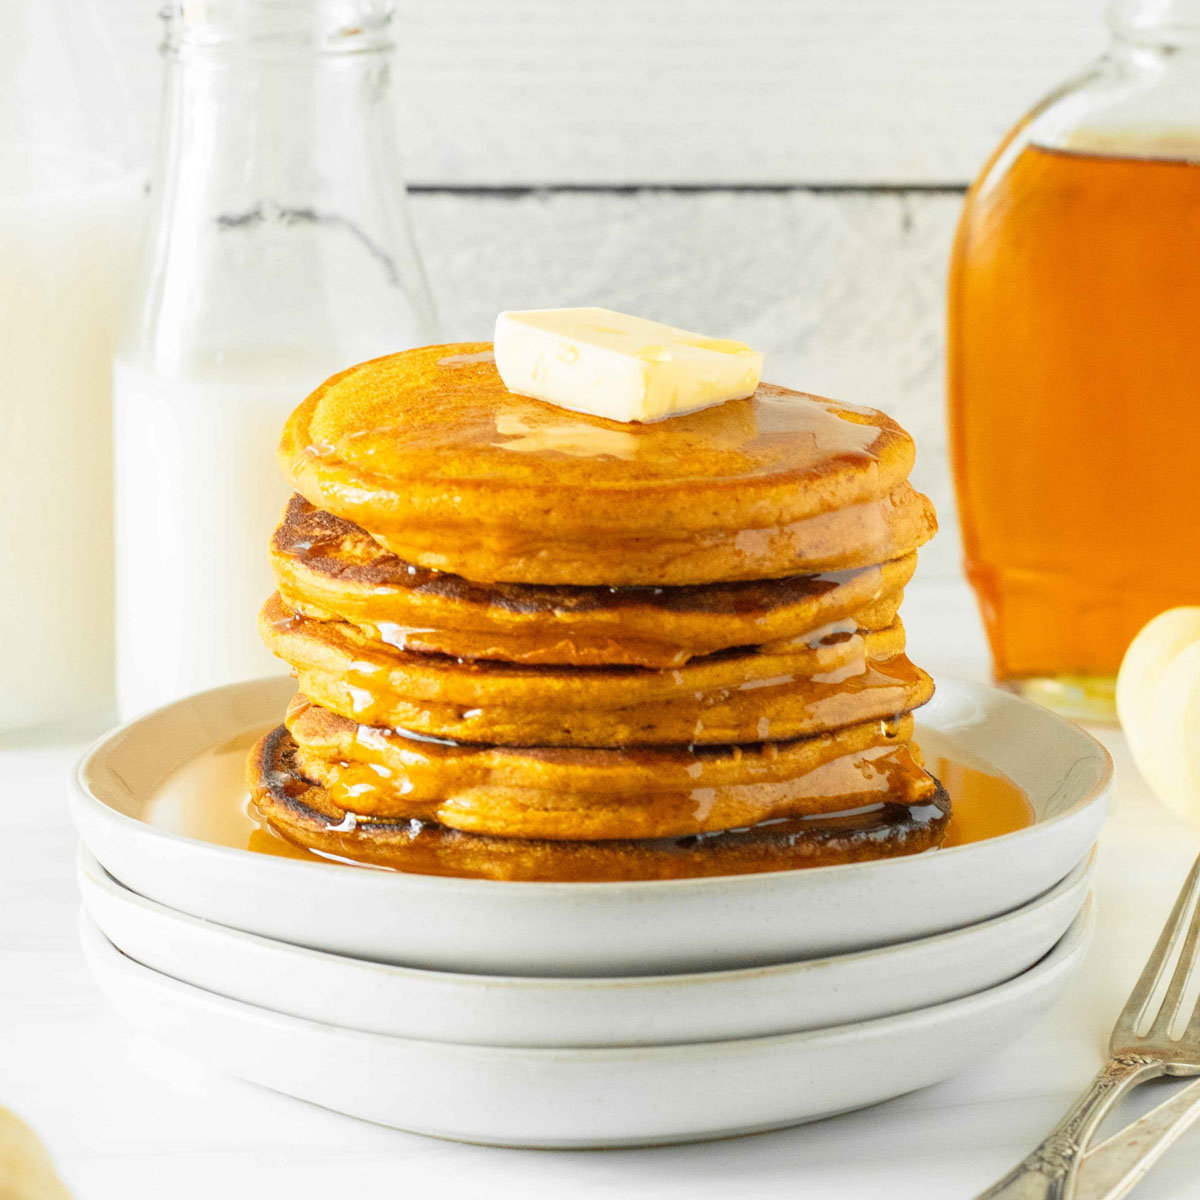 These sourdough pumpkin pancakes are an easy sourdough recipe made with simple ingredients including pumpkin puree, classic fall spices and sourdough discard to make delicious pumpkin pancakes.